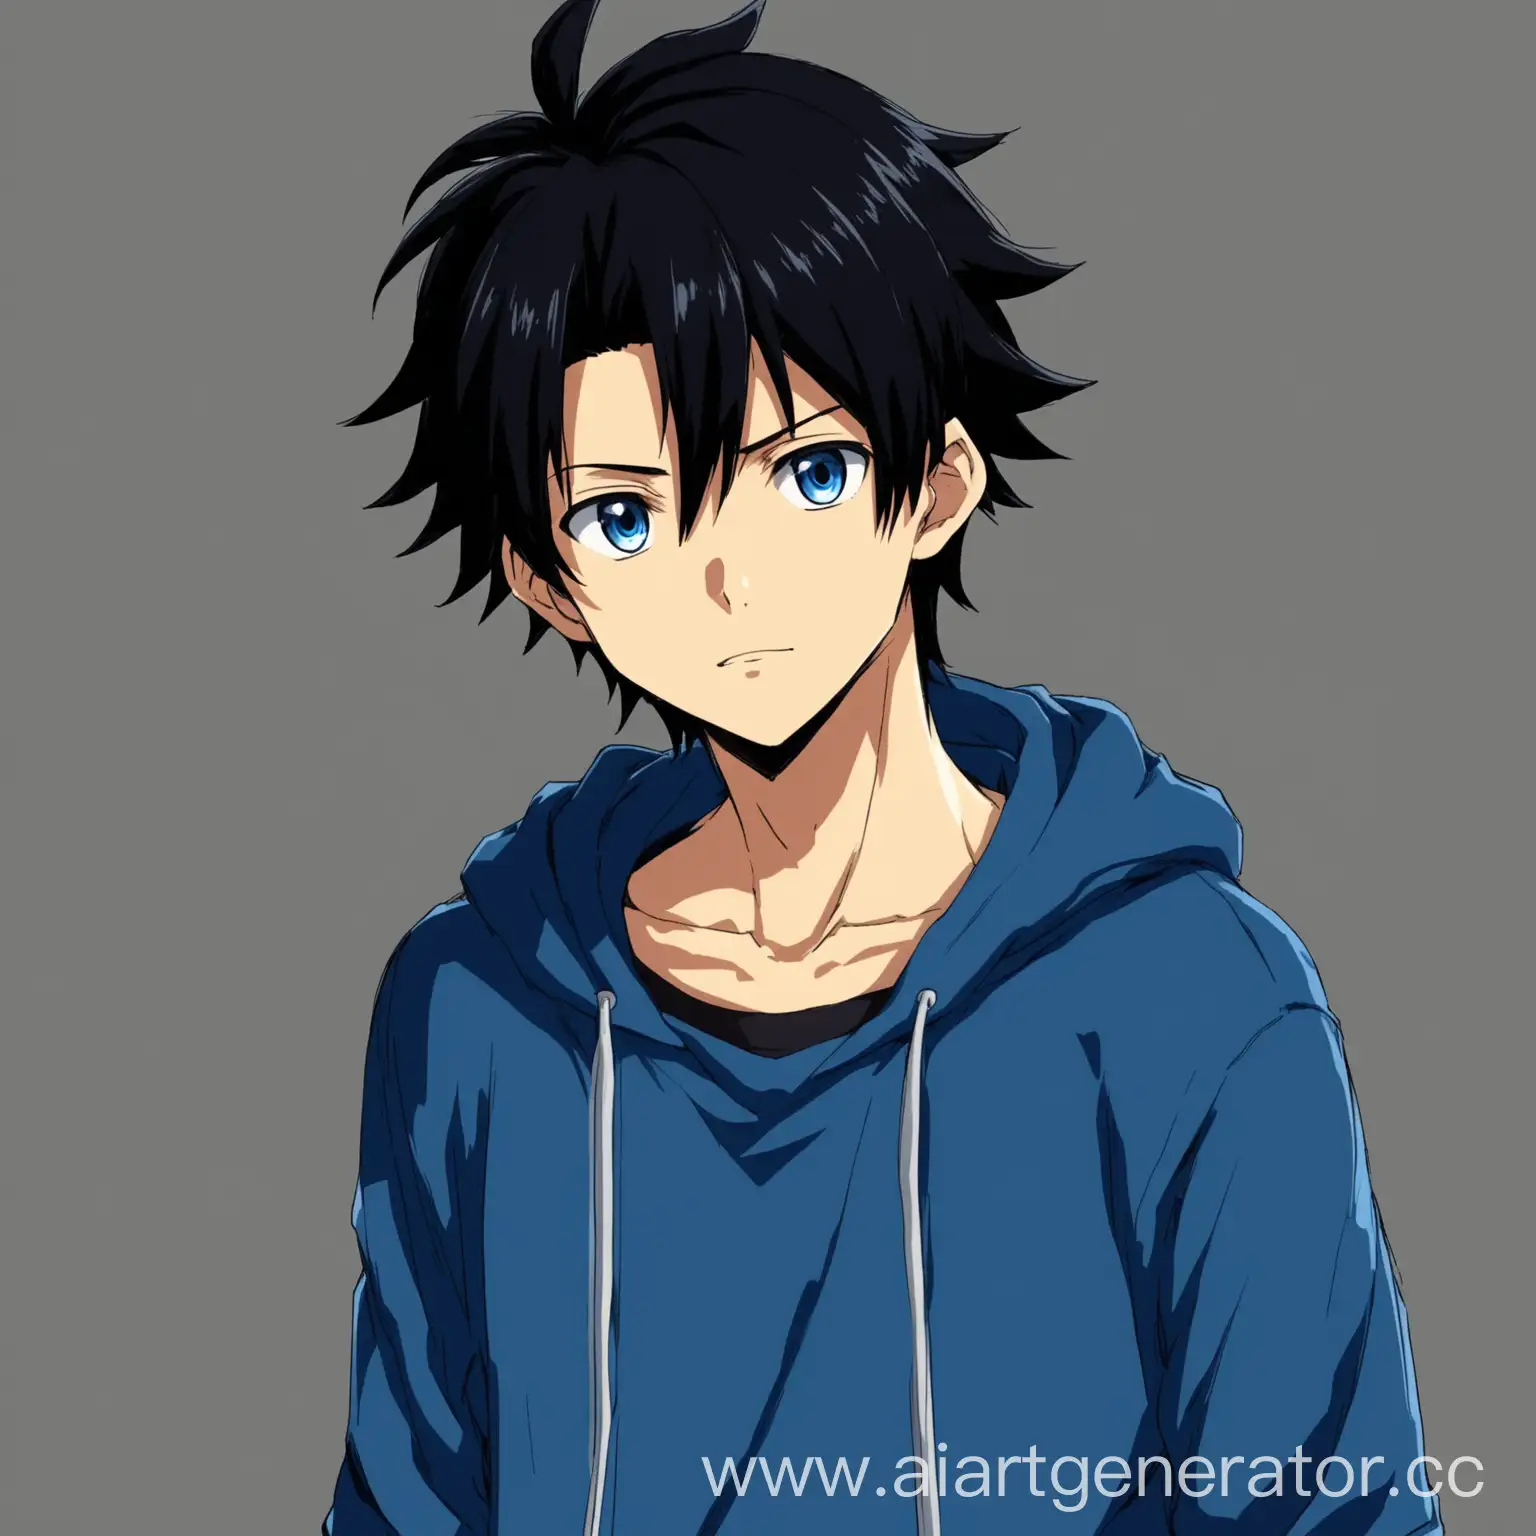 BlueClad-Male-Anime-Hero-with-Black-Hair-Aged-16